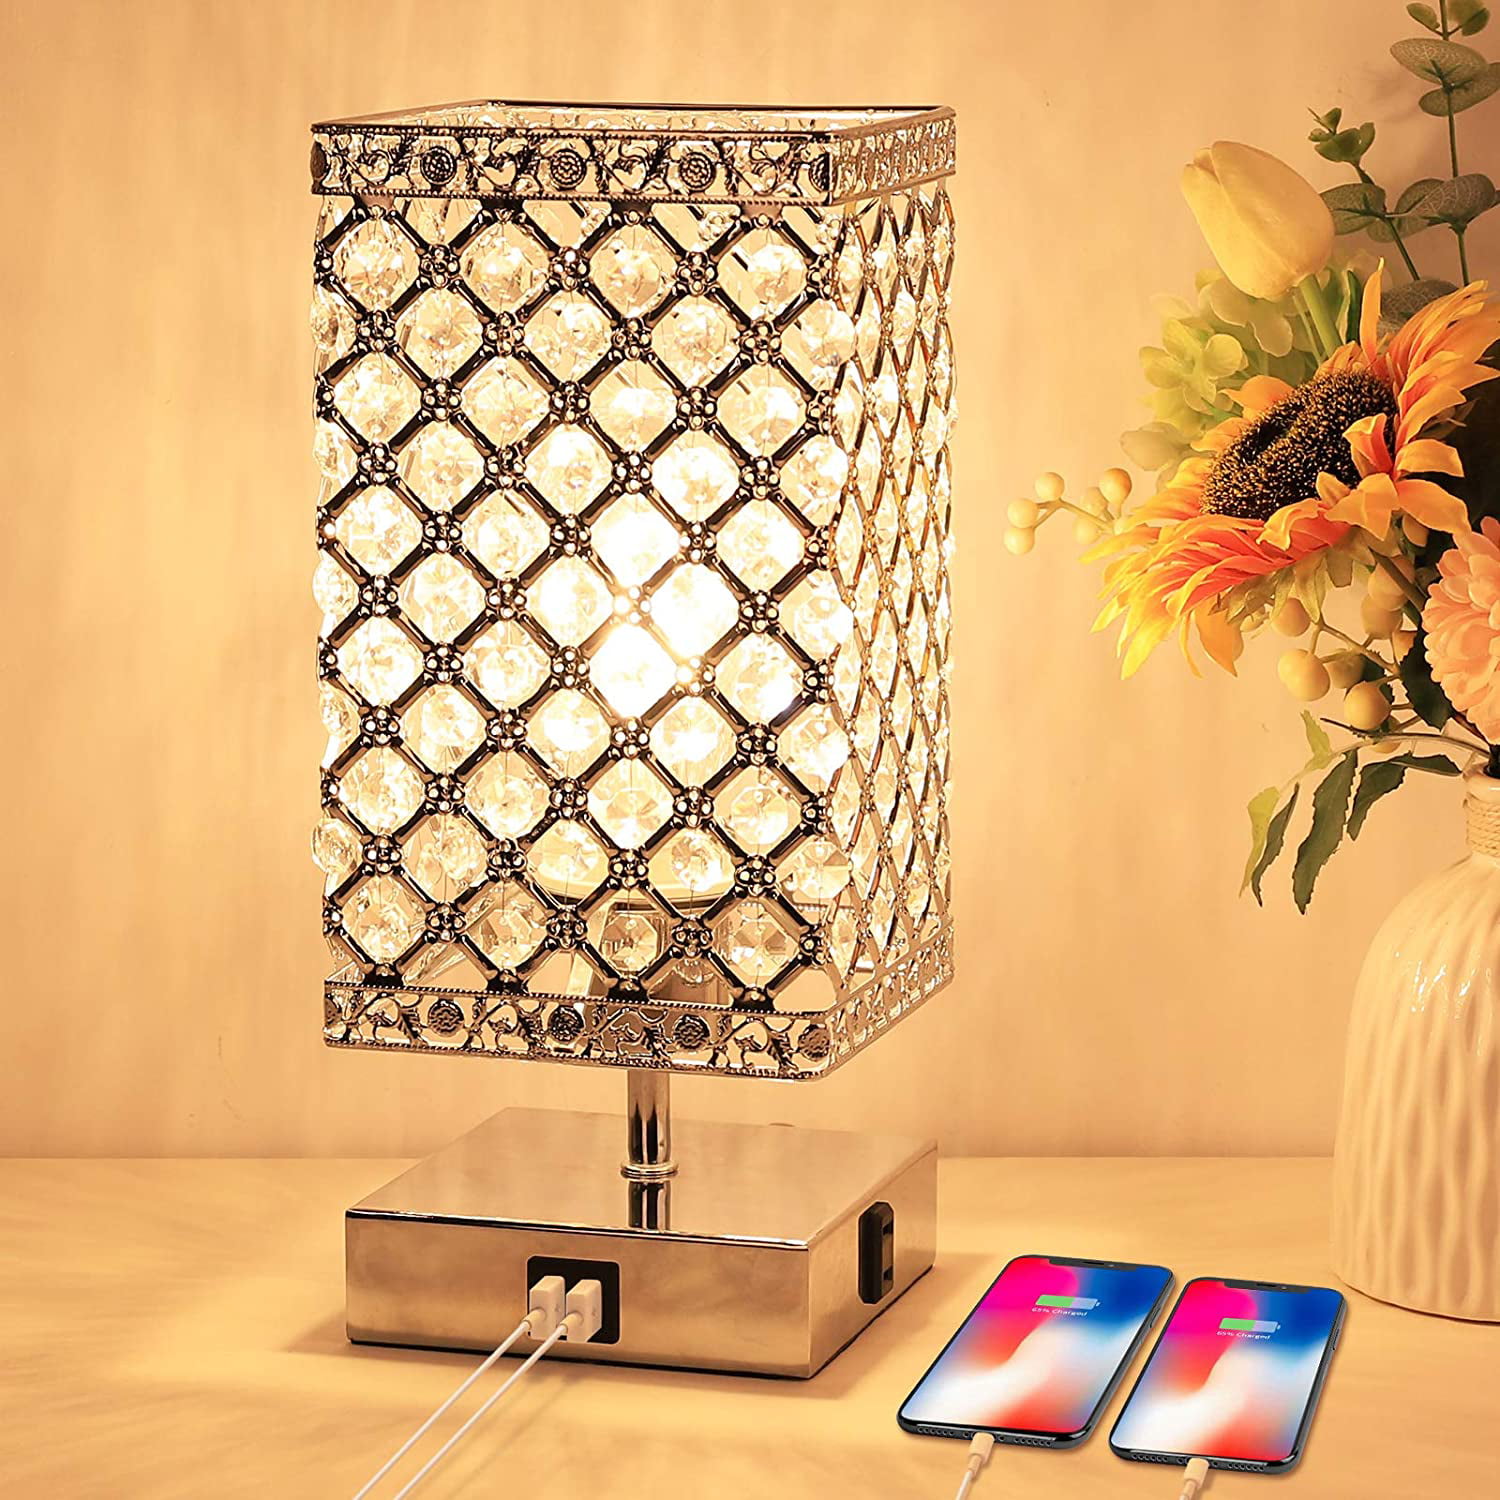 Dimmable Crystal Lamp Bedside Lamps, Touch Control Crystal Table Lamp With Usb Port